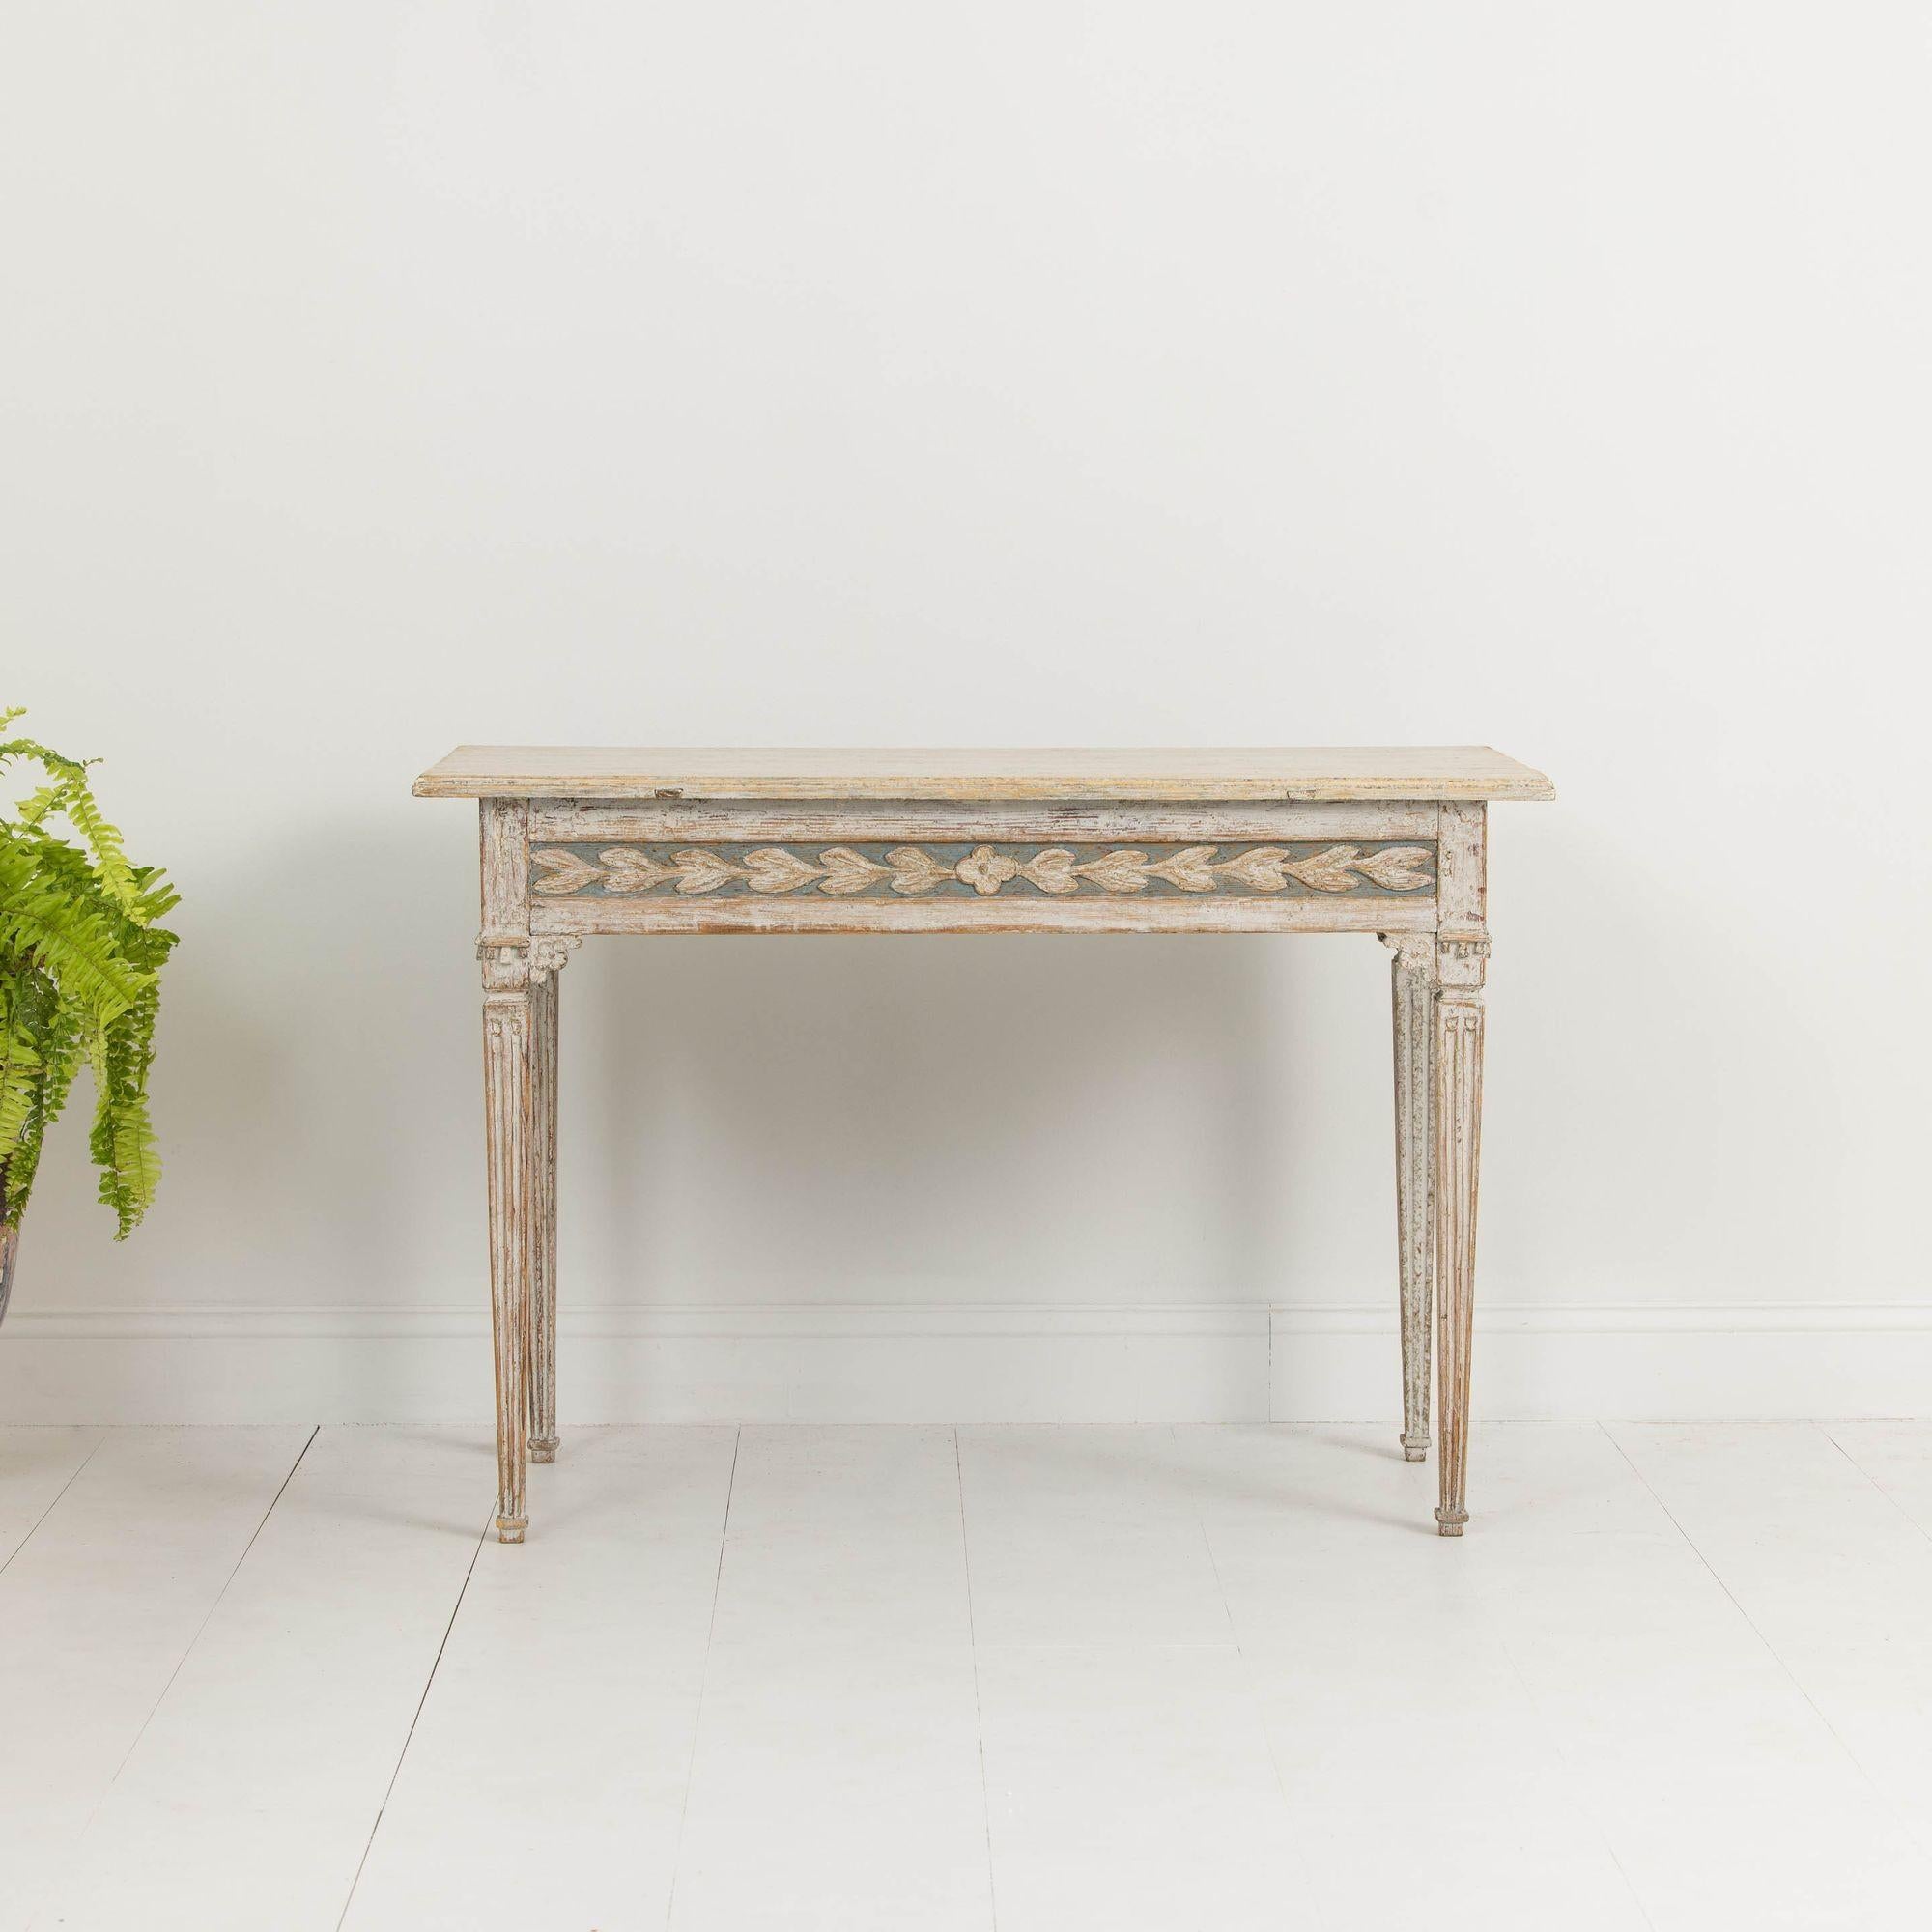 Hand-Painted 18th c. Swedish Gustavian Period Painted Console Table